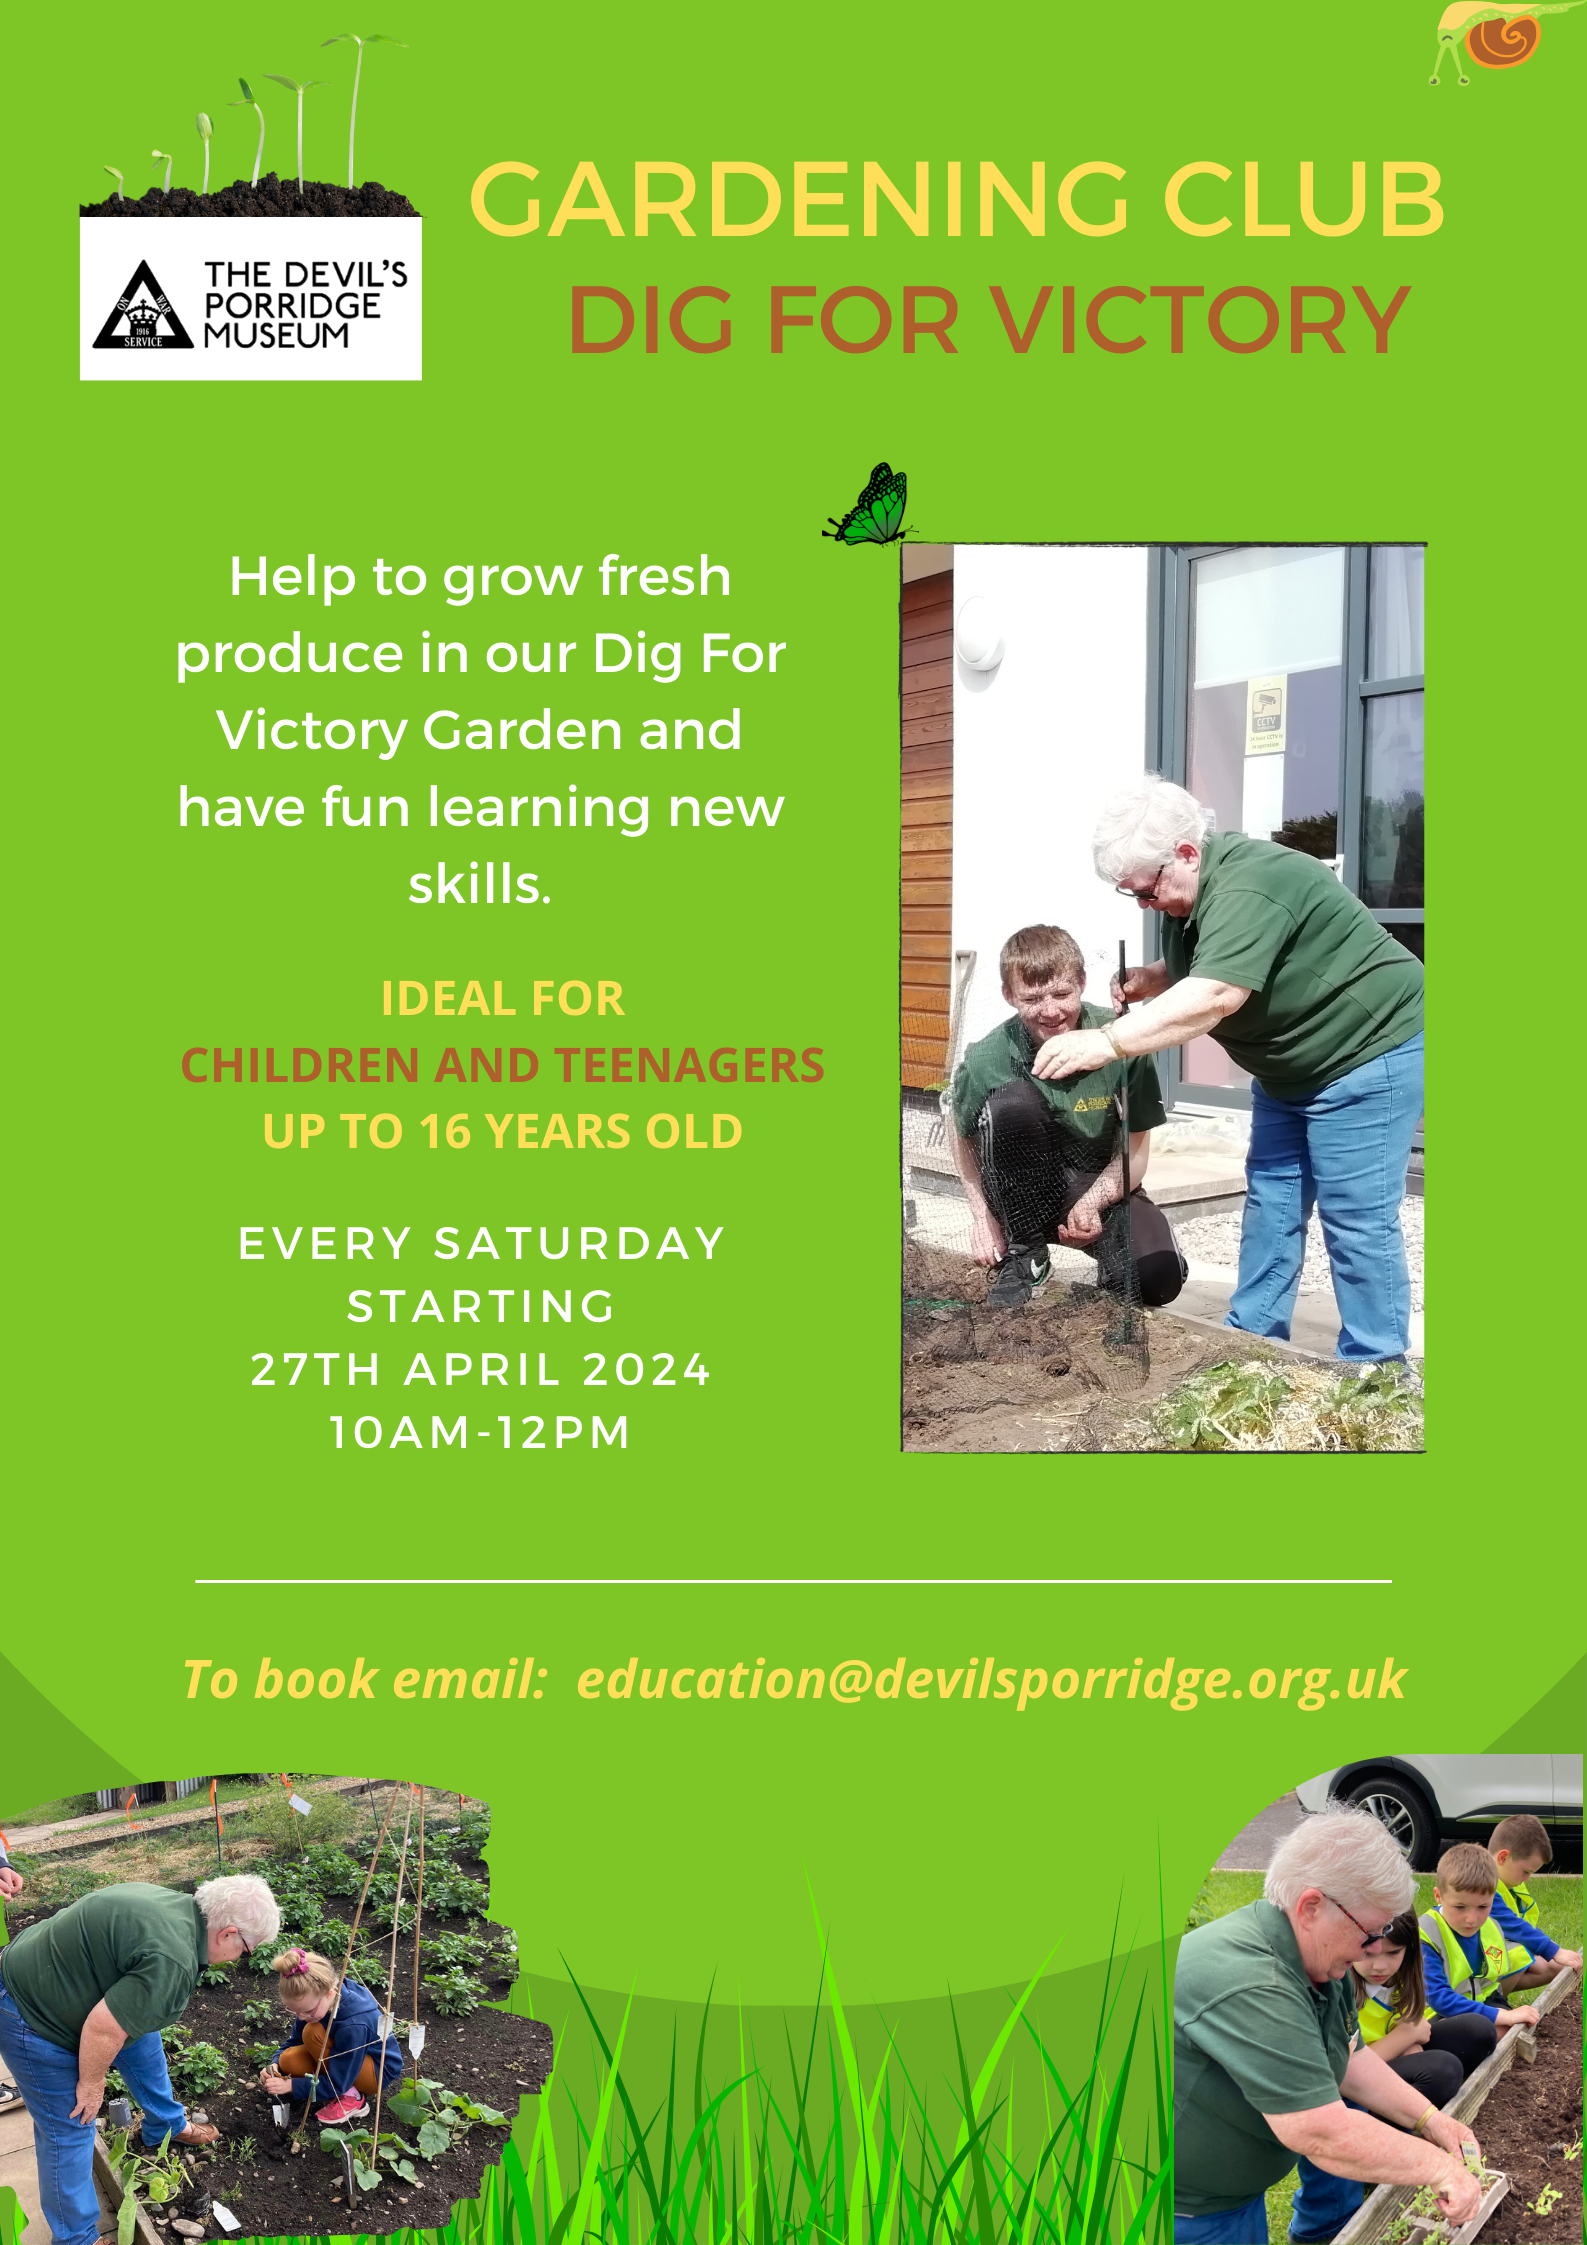 A poster advertising Gardening Club at The Devil's Porridge Museum. This club is ideal for children and teenagers up to sixteen years old. It starts on Saturday 27th April 2024 from 10am to 12pm. To book please email education@devilsporridge.org.uk